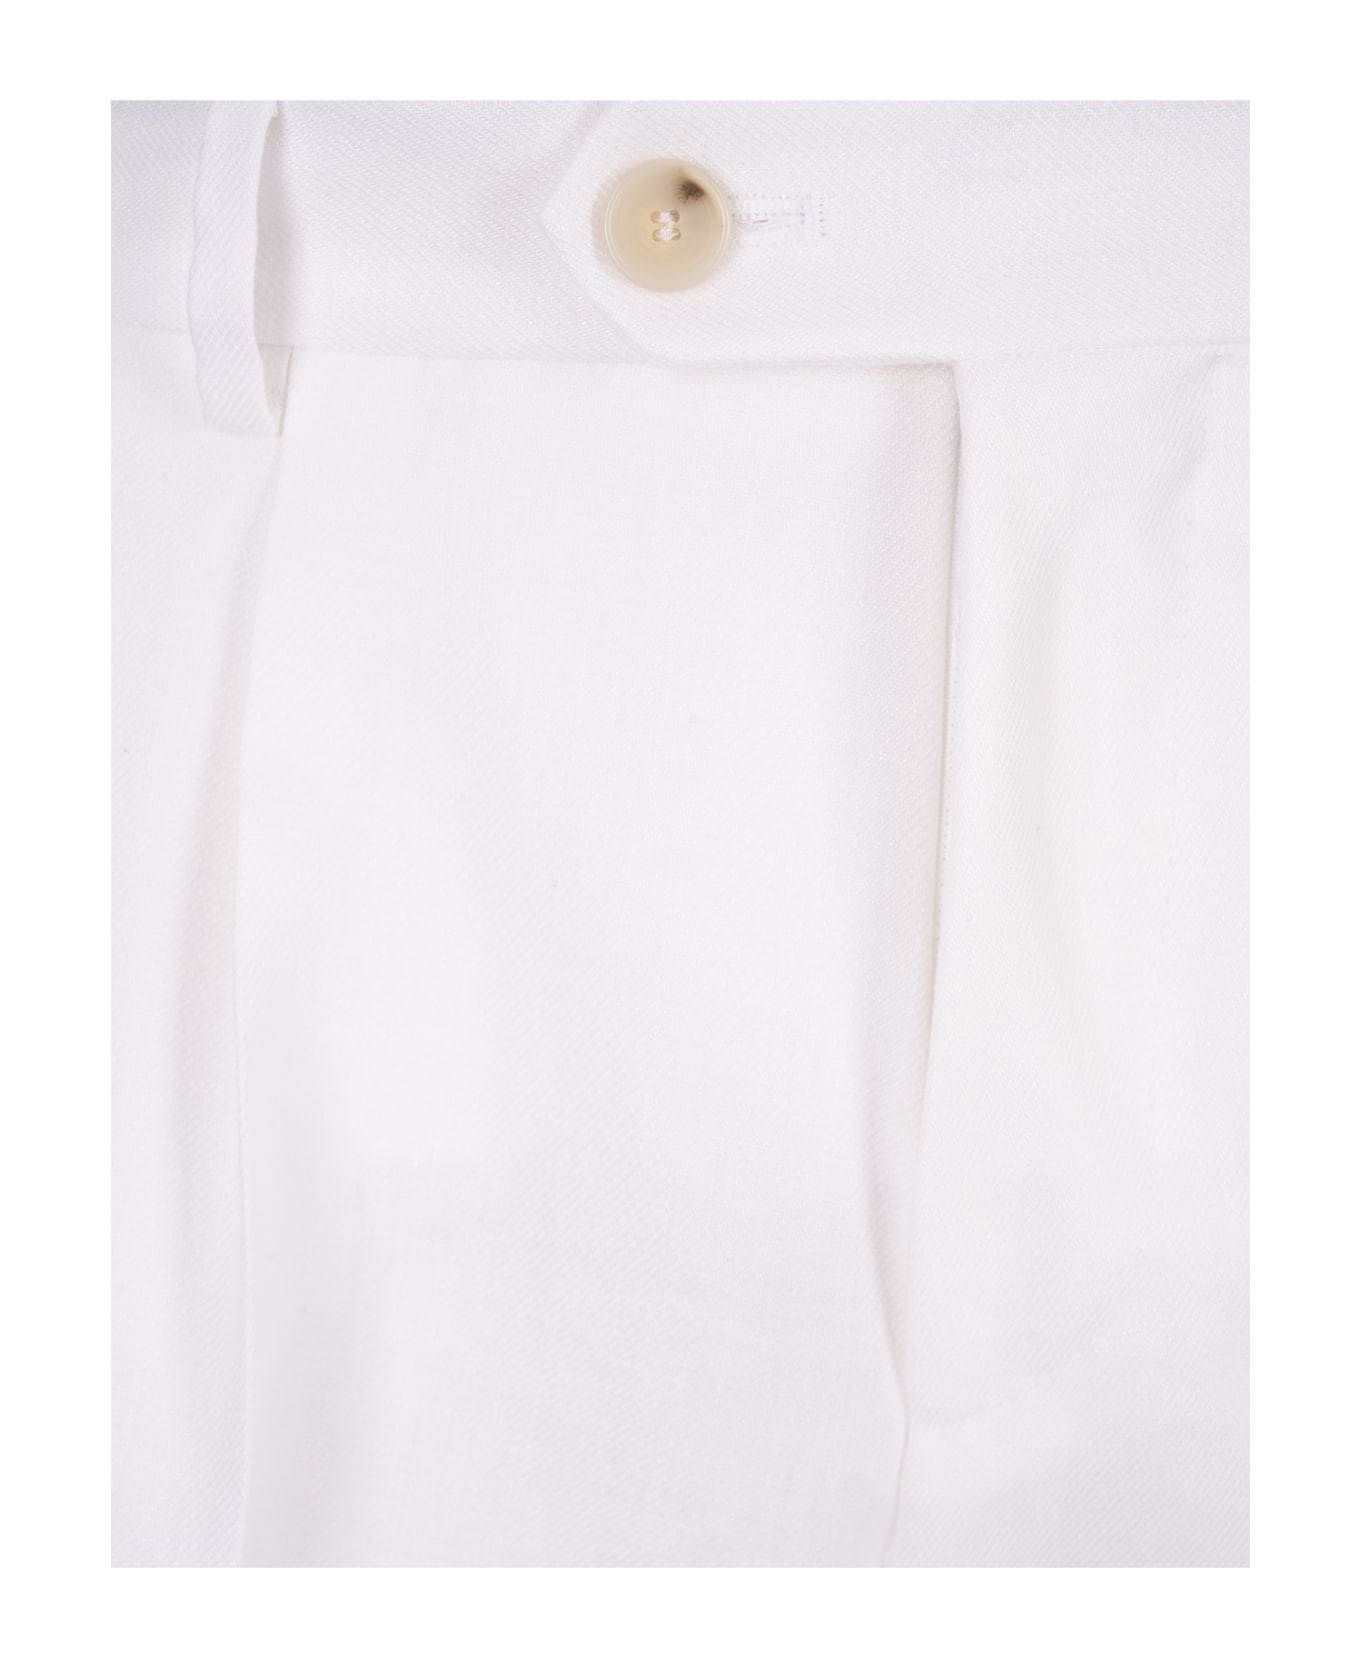 Hugo Boss Relaxed Fit Trousers In White Wrinkle Resistant Linen - White